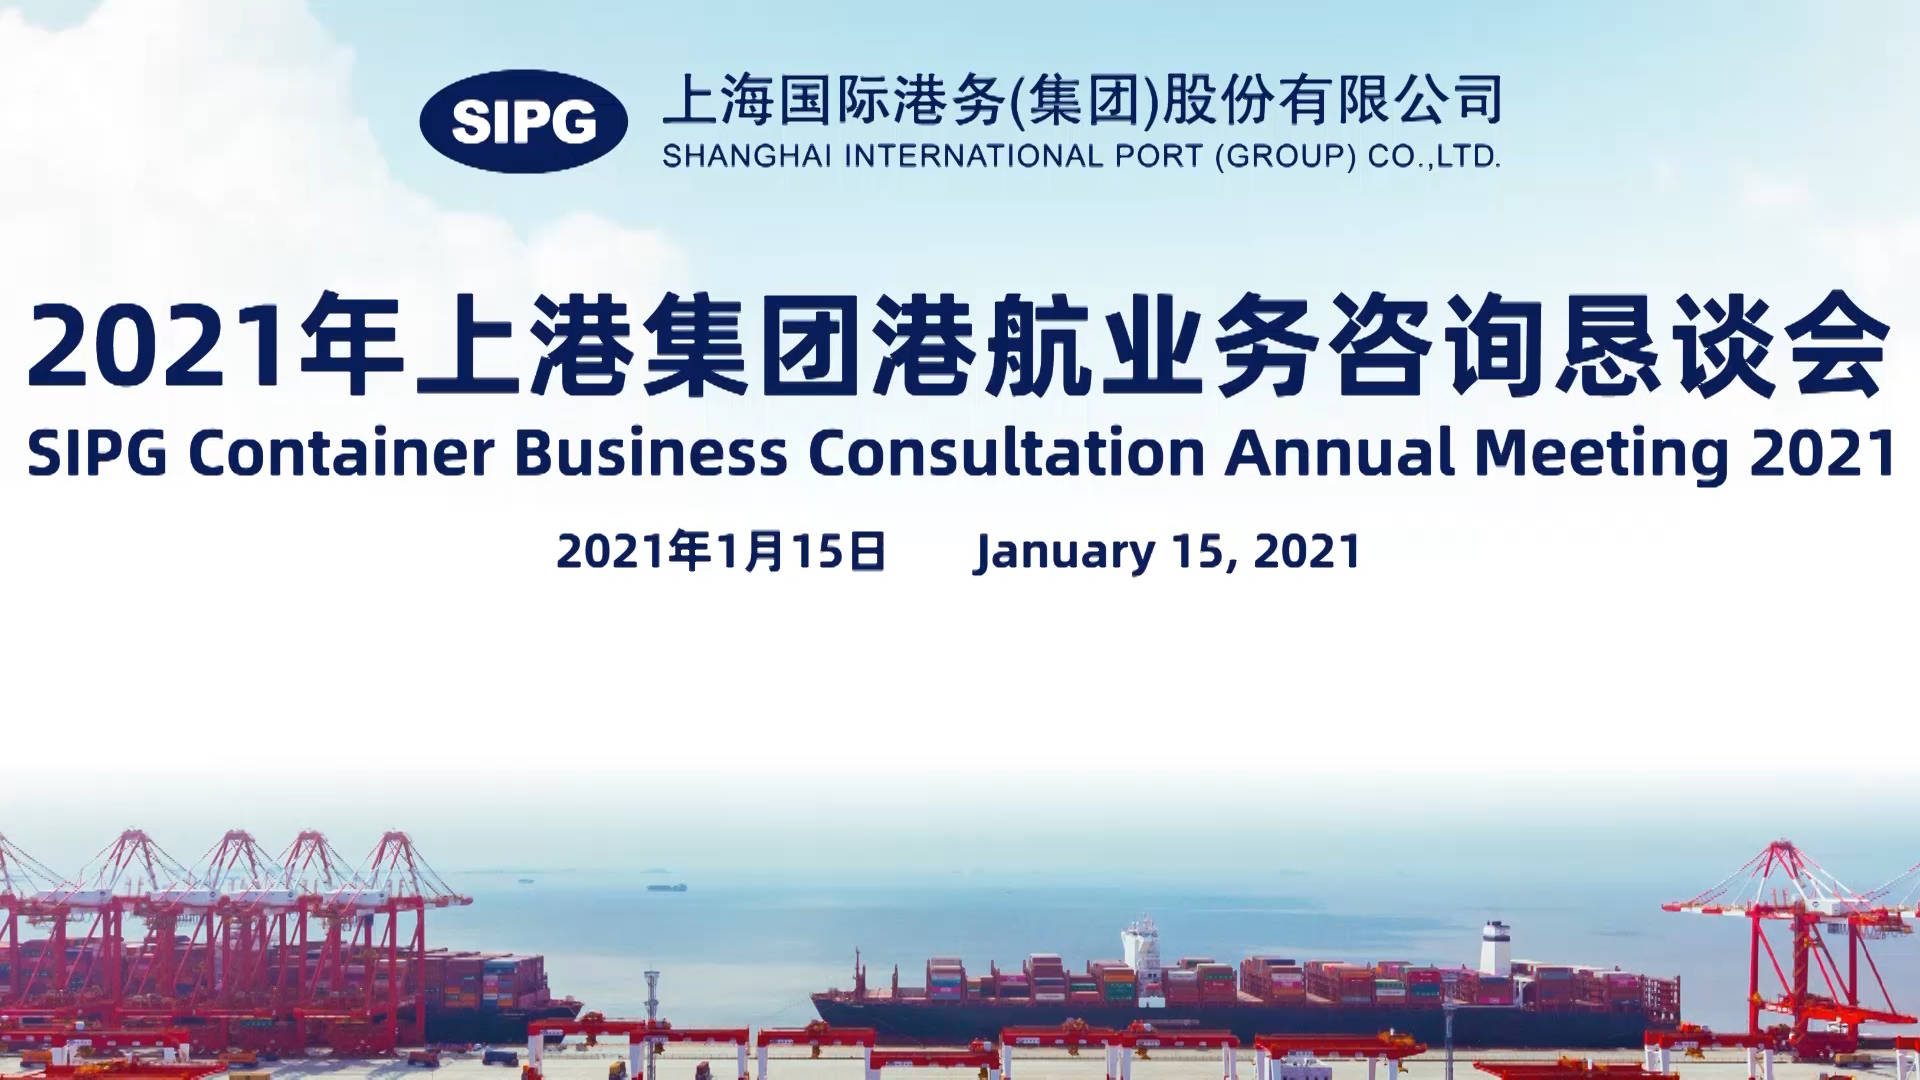 SIPG Sea-rail Intermodal Transportation Quickens Pace in Launching Premium Services